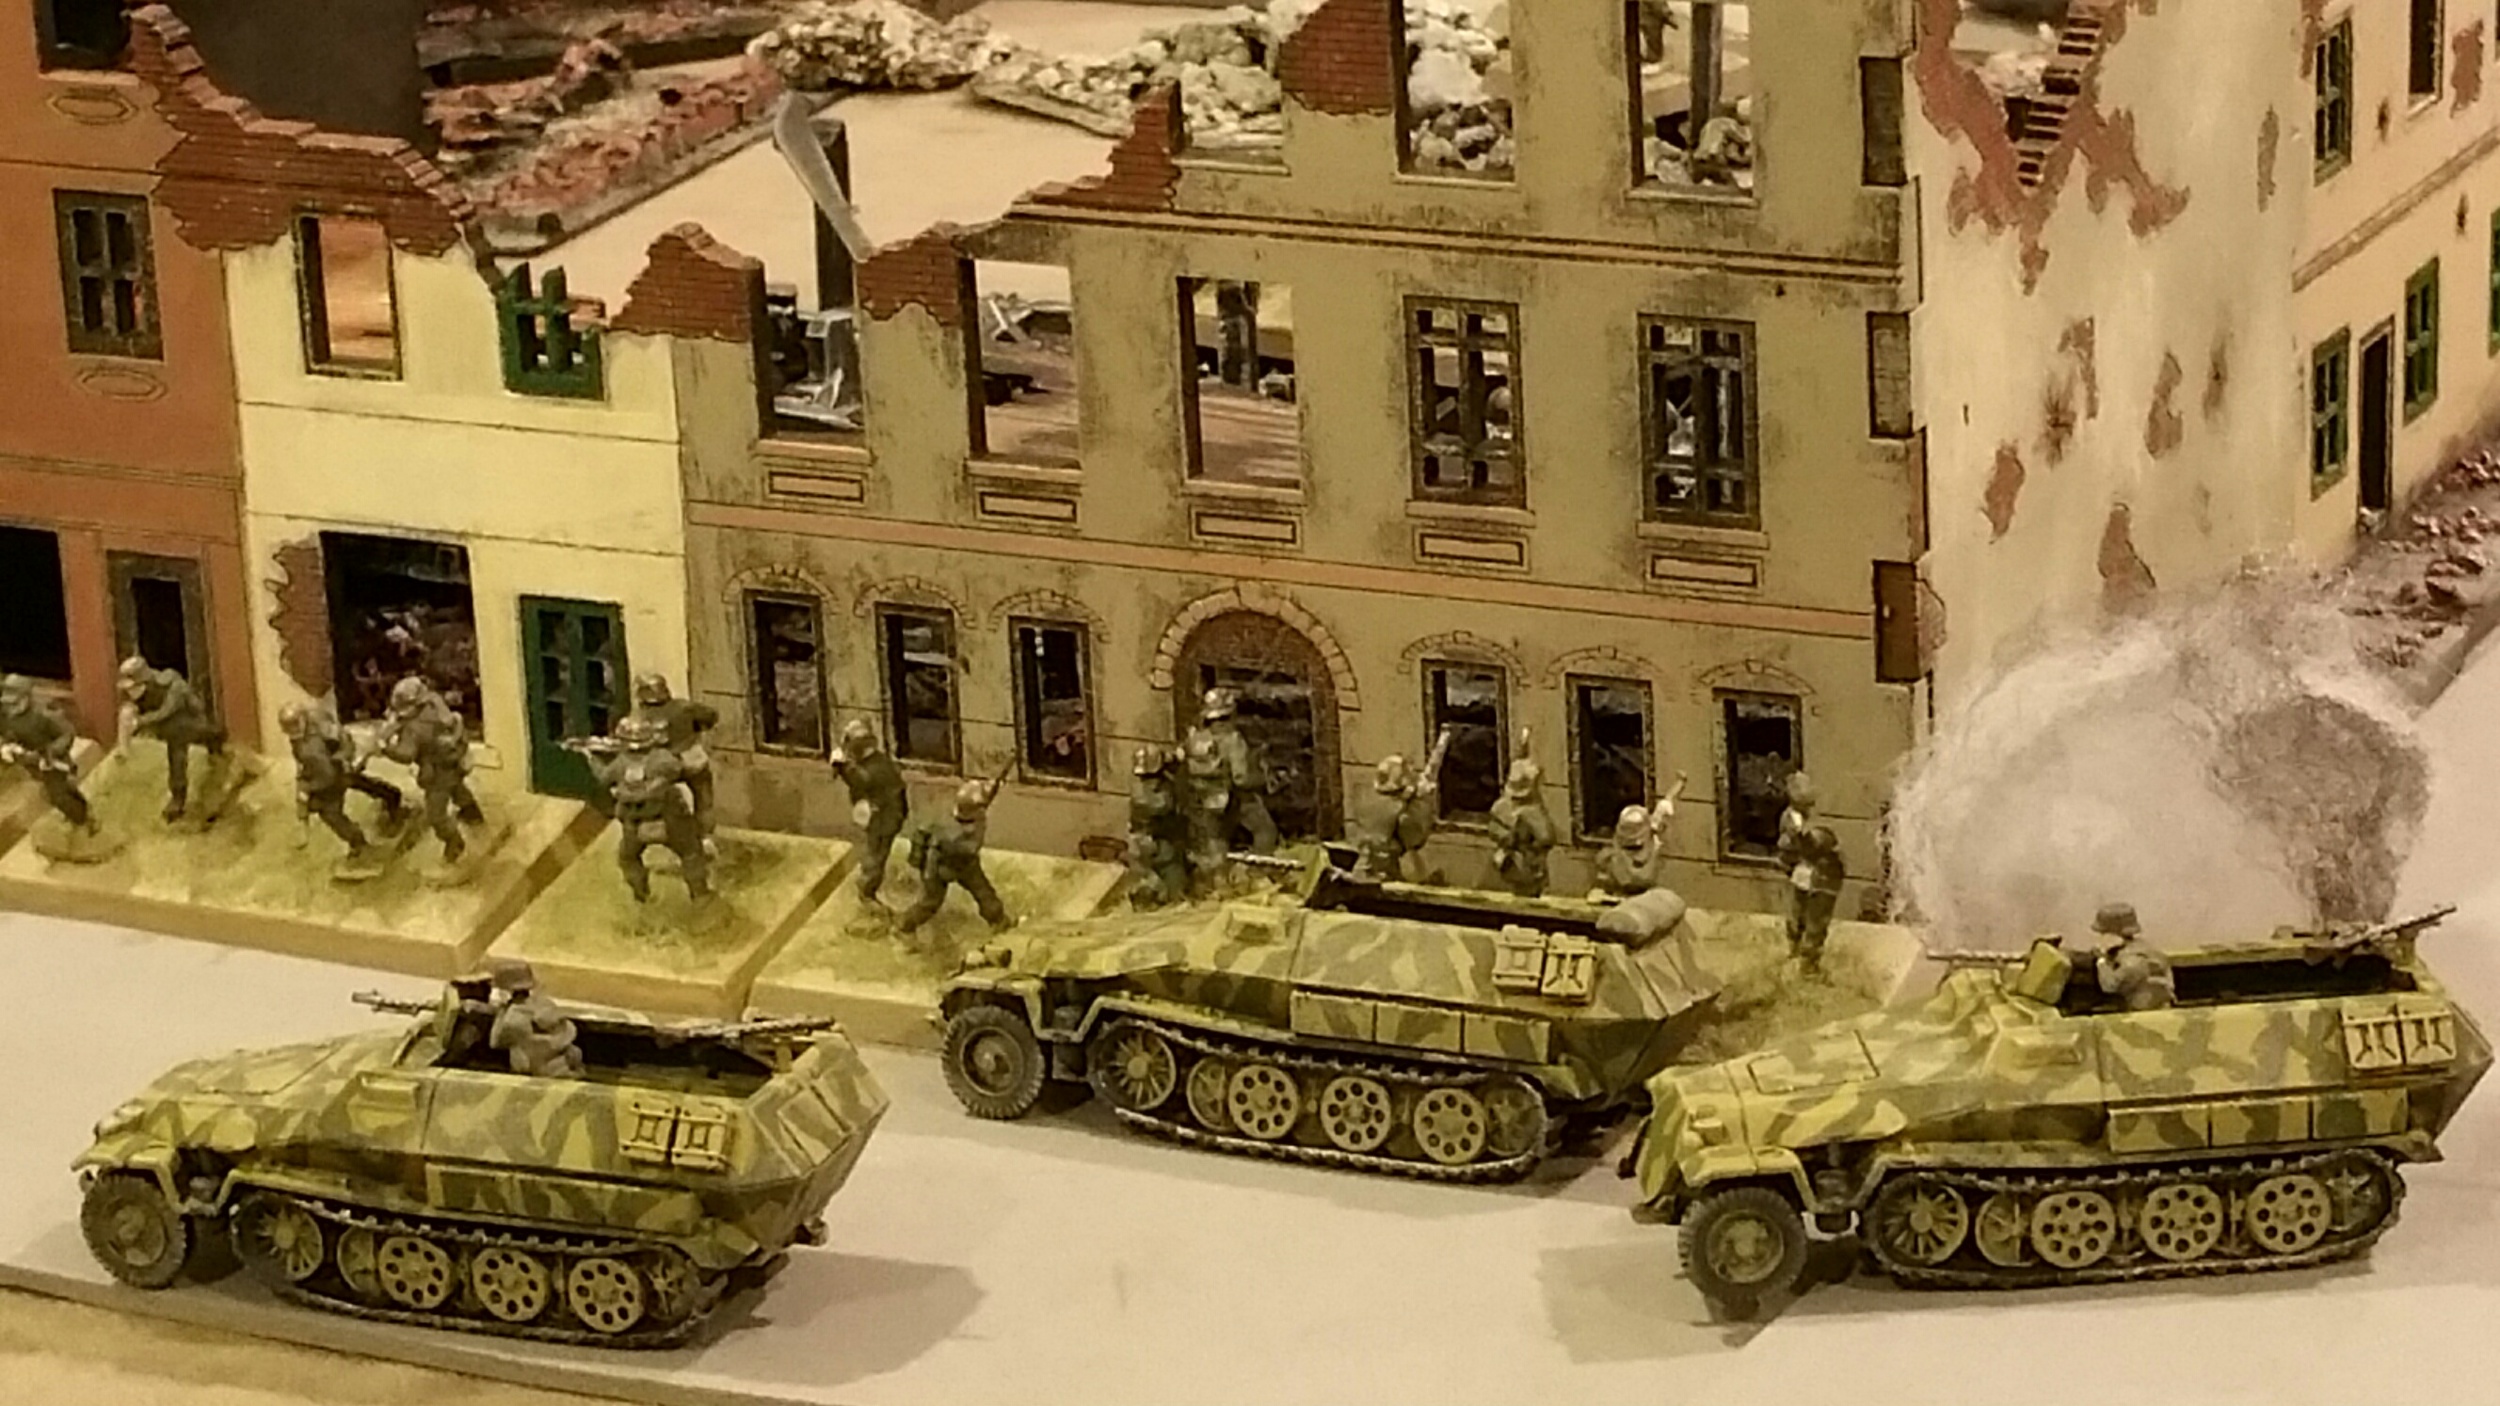   The German infantry pushes in the center. After a bloody repulse of one platoon in close combat, 2 others push into town. Armored Panzer grenadiers disembark and begin to push the remaining G.I.s in town.  